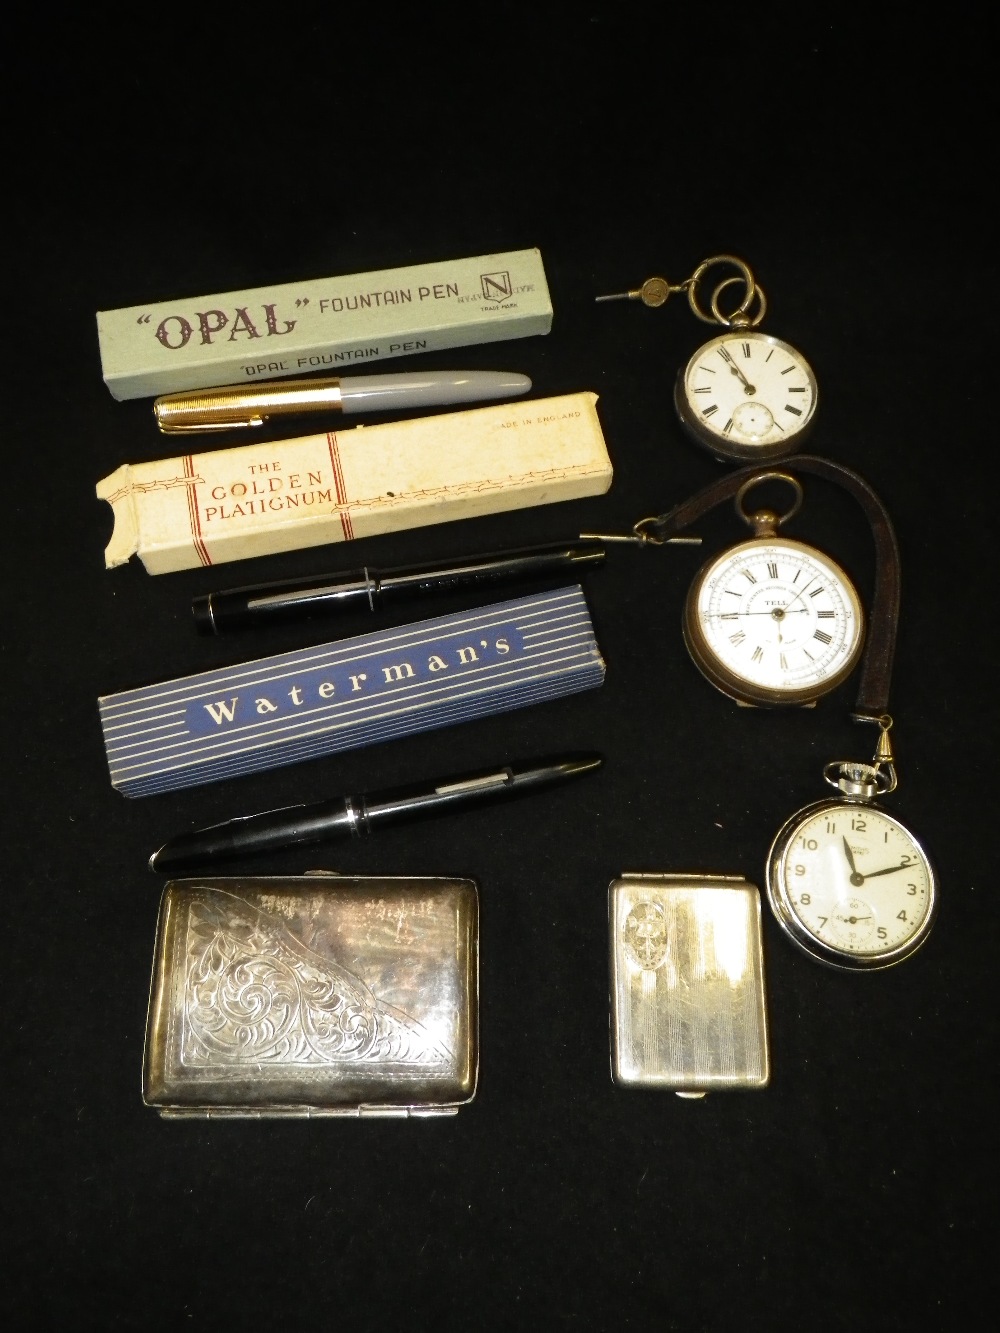 A Tell brass-cased chronograph and other items including watches and pens (a lot)